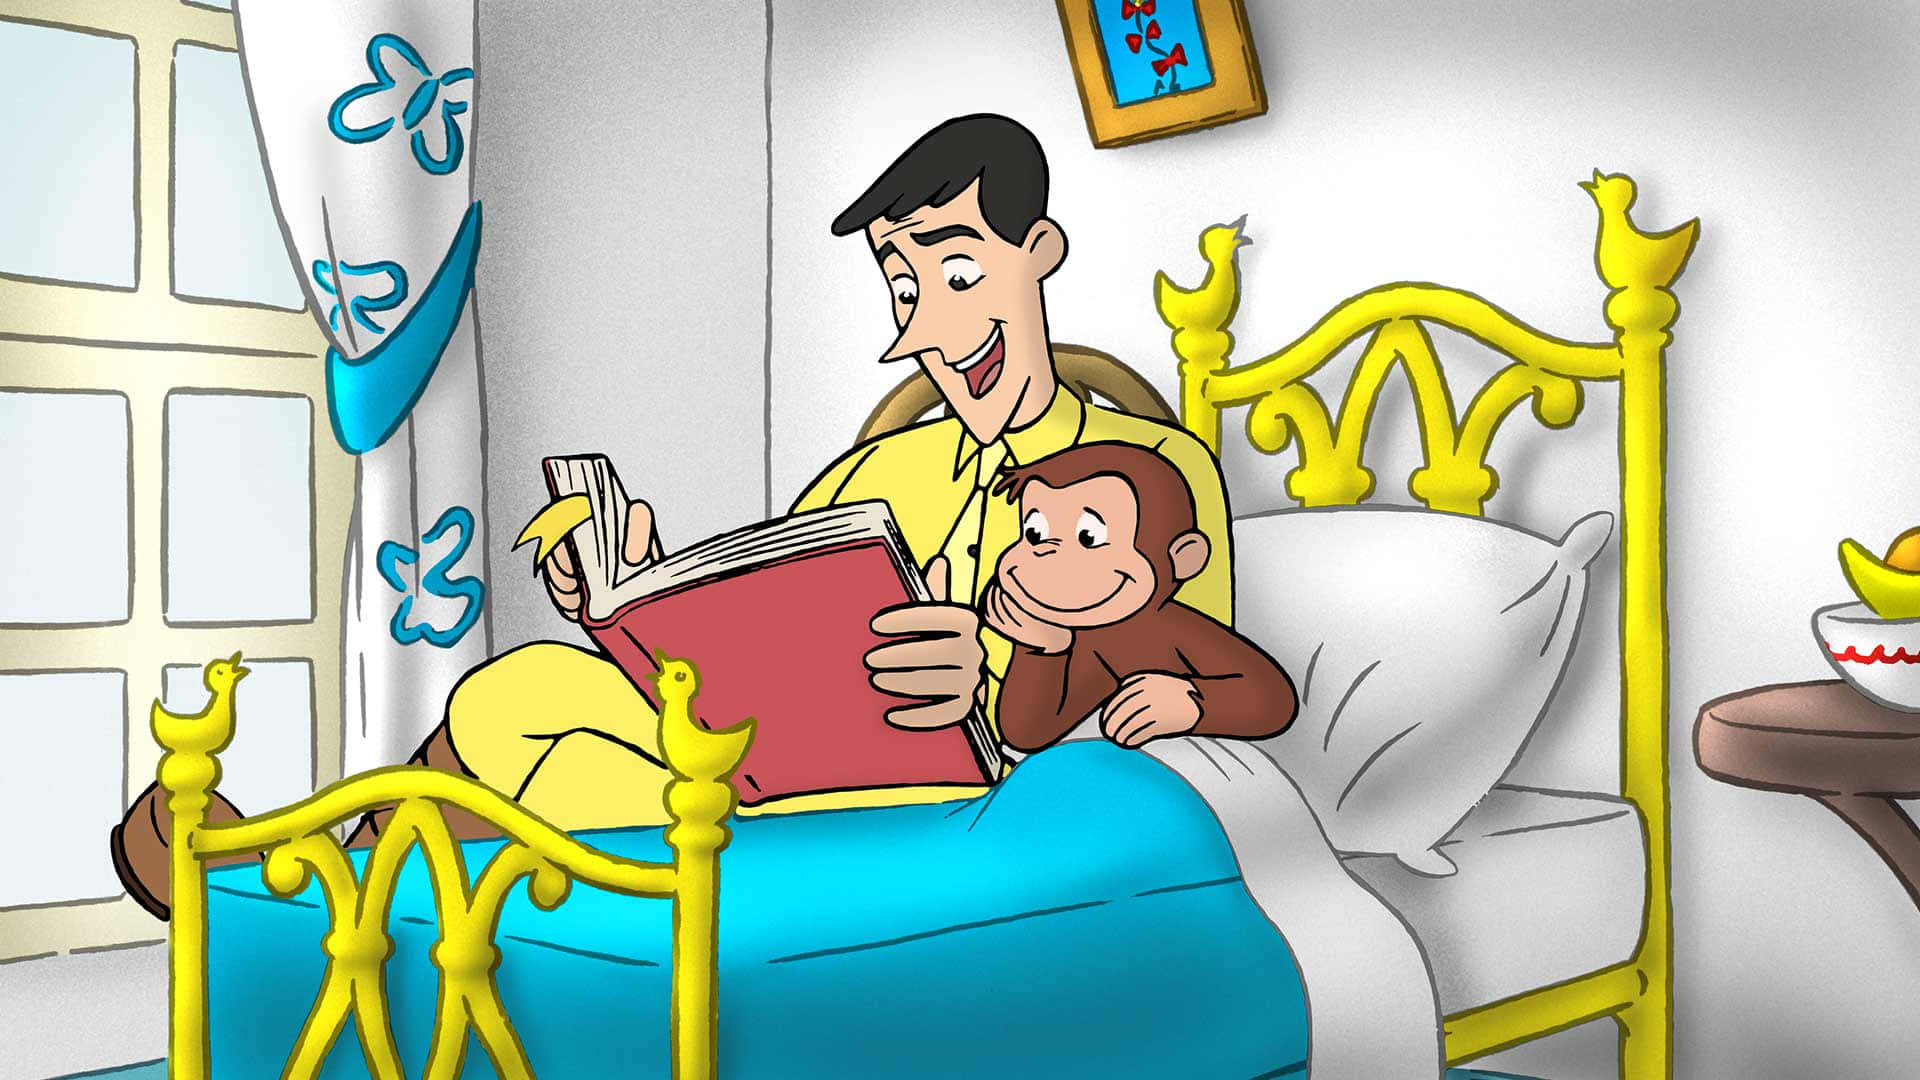 Welcome to Curious George’s world